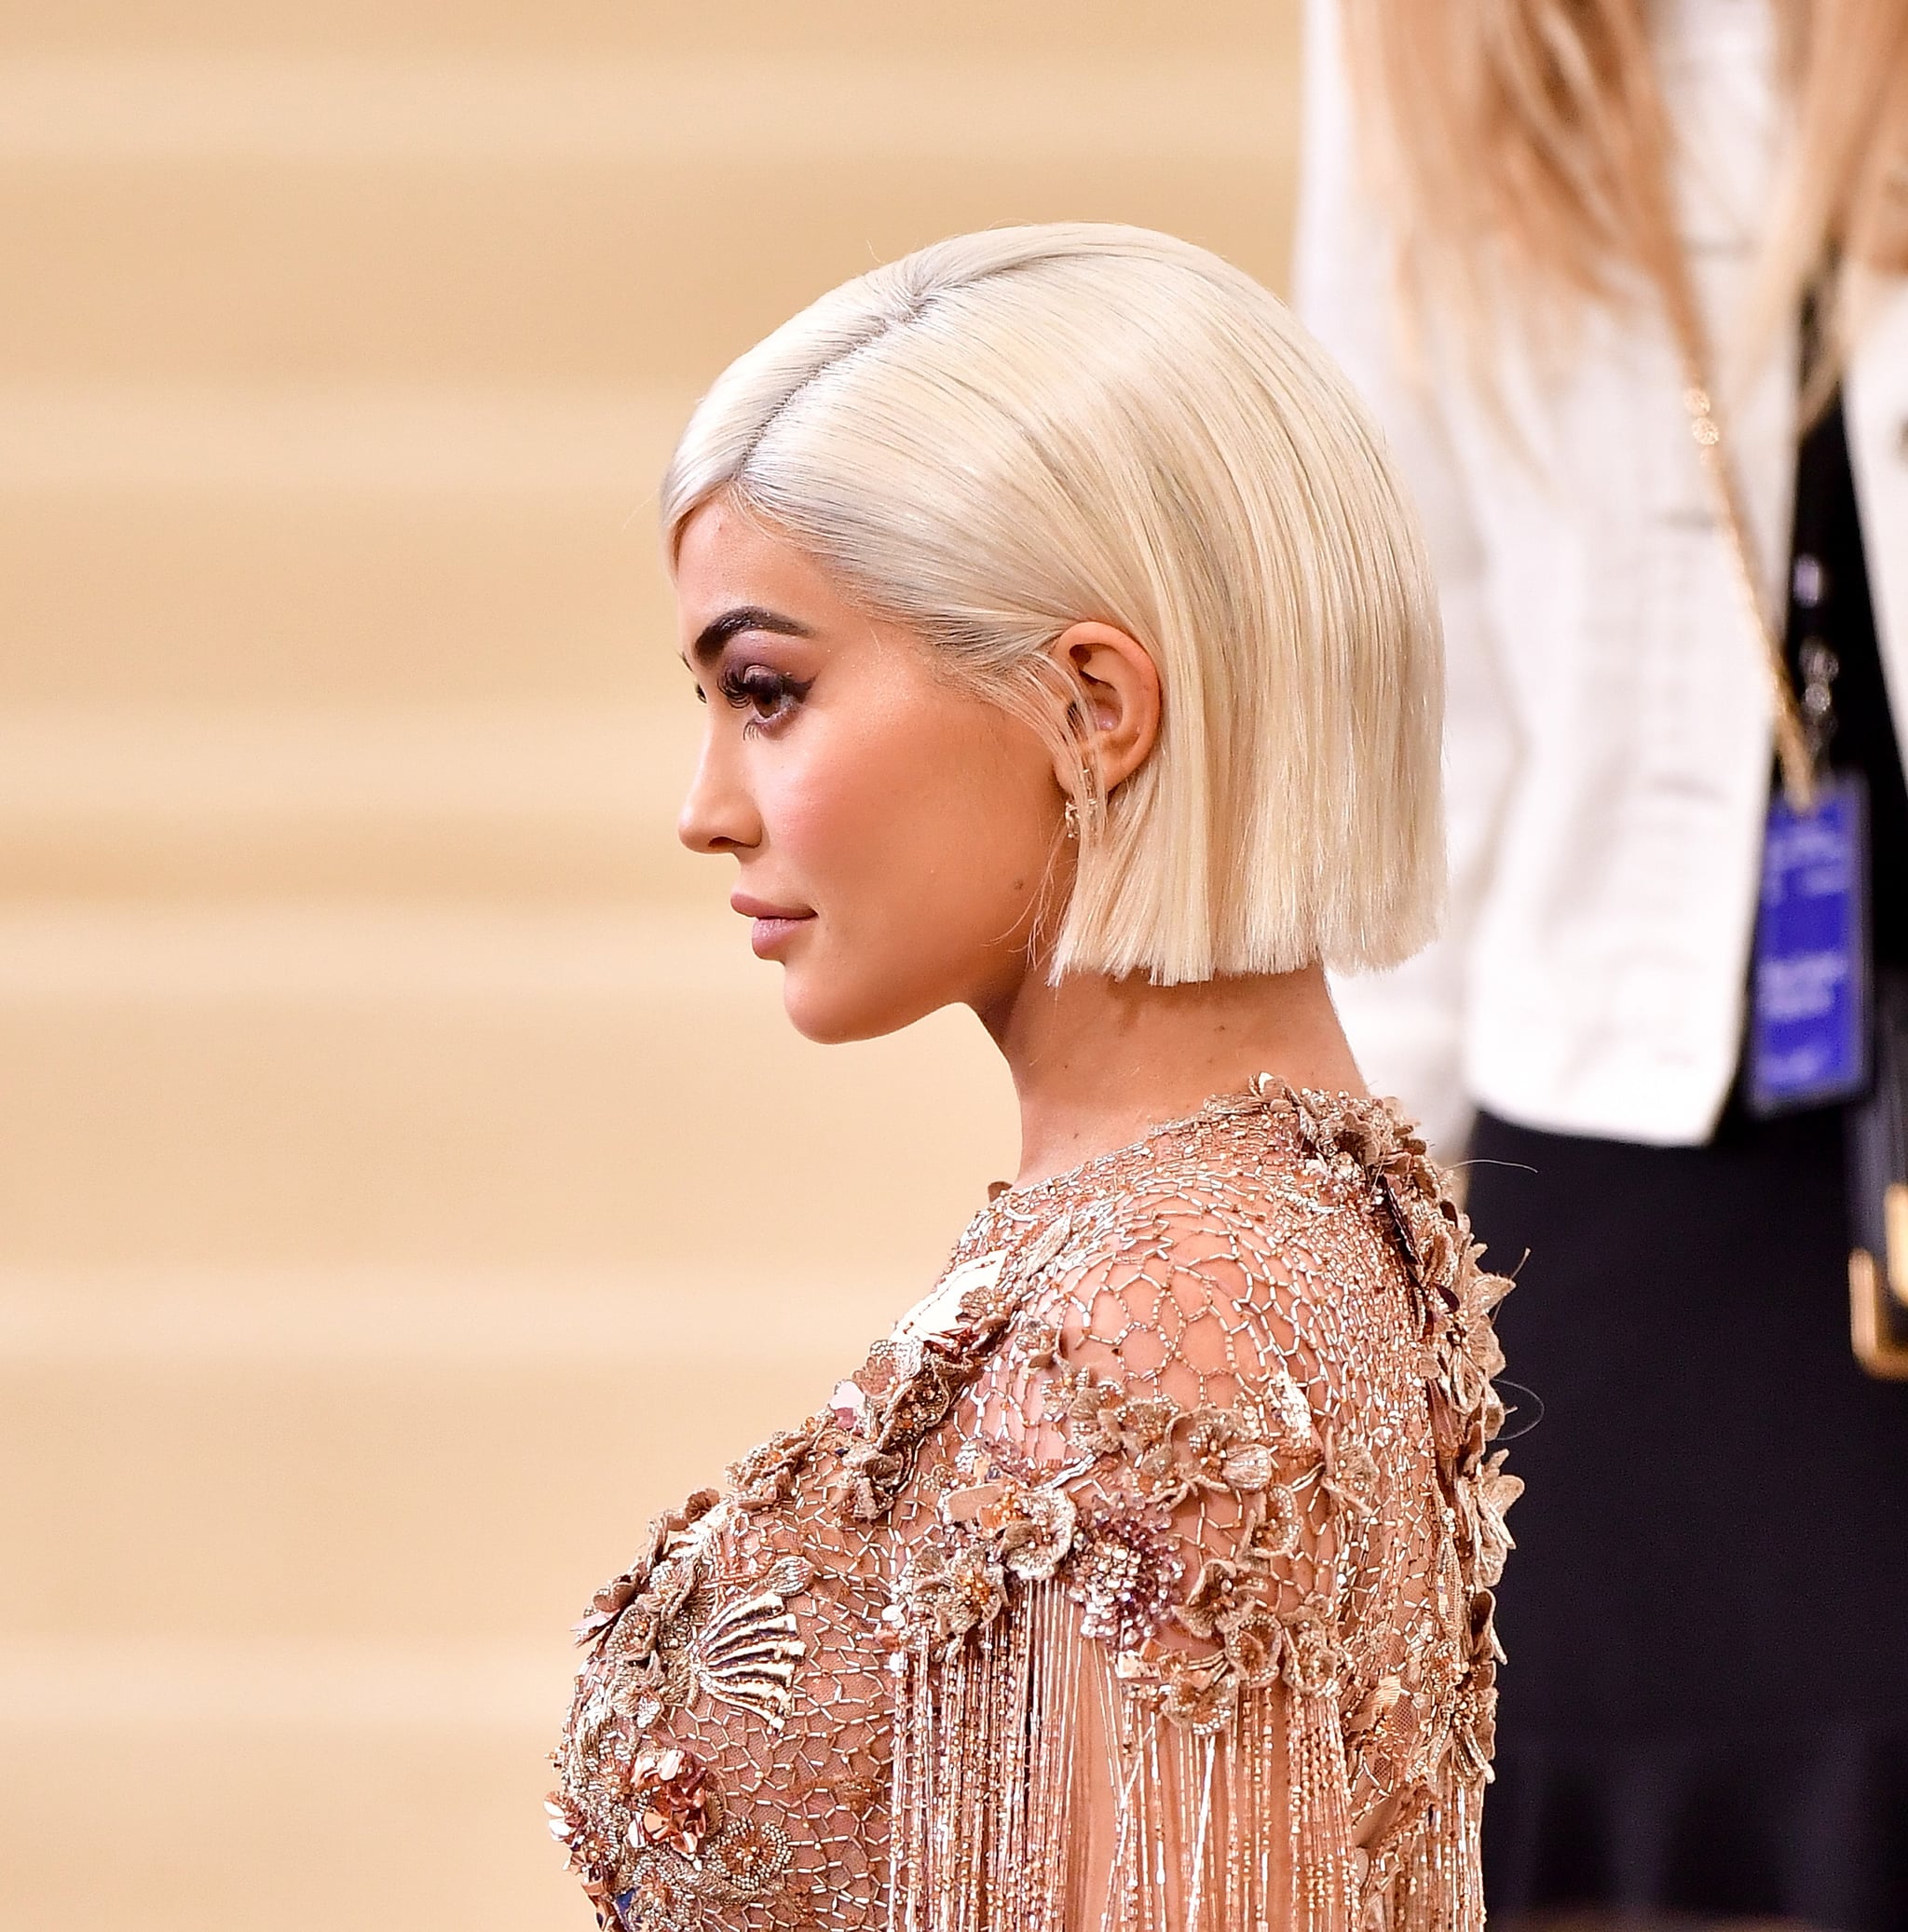 Image of Kylie Jenner with blunt cut blonde hairstyle